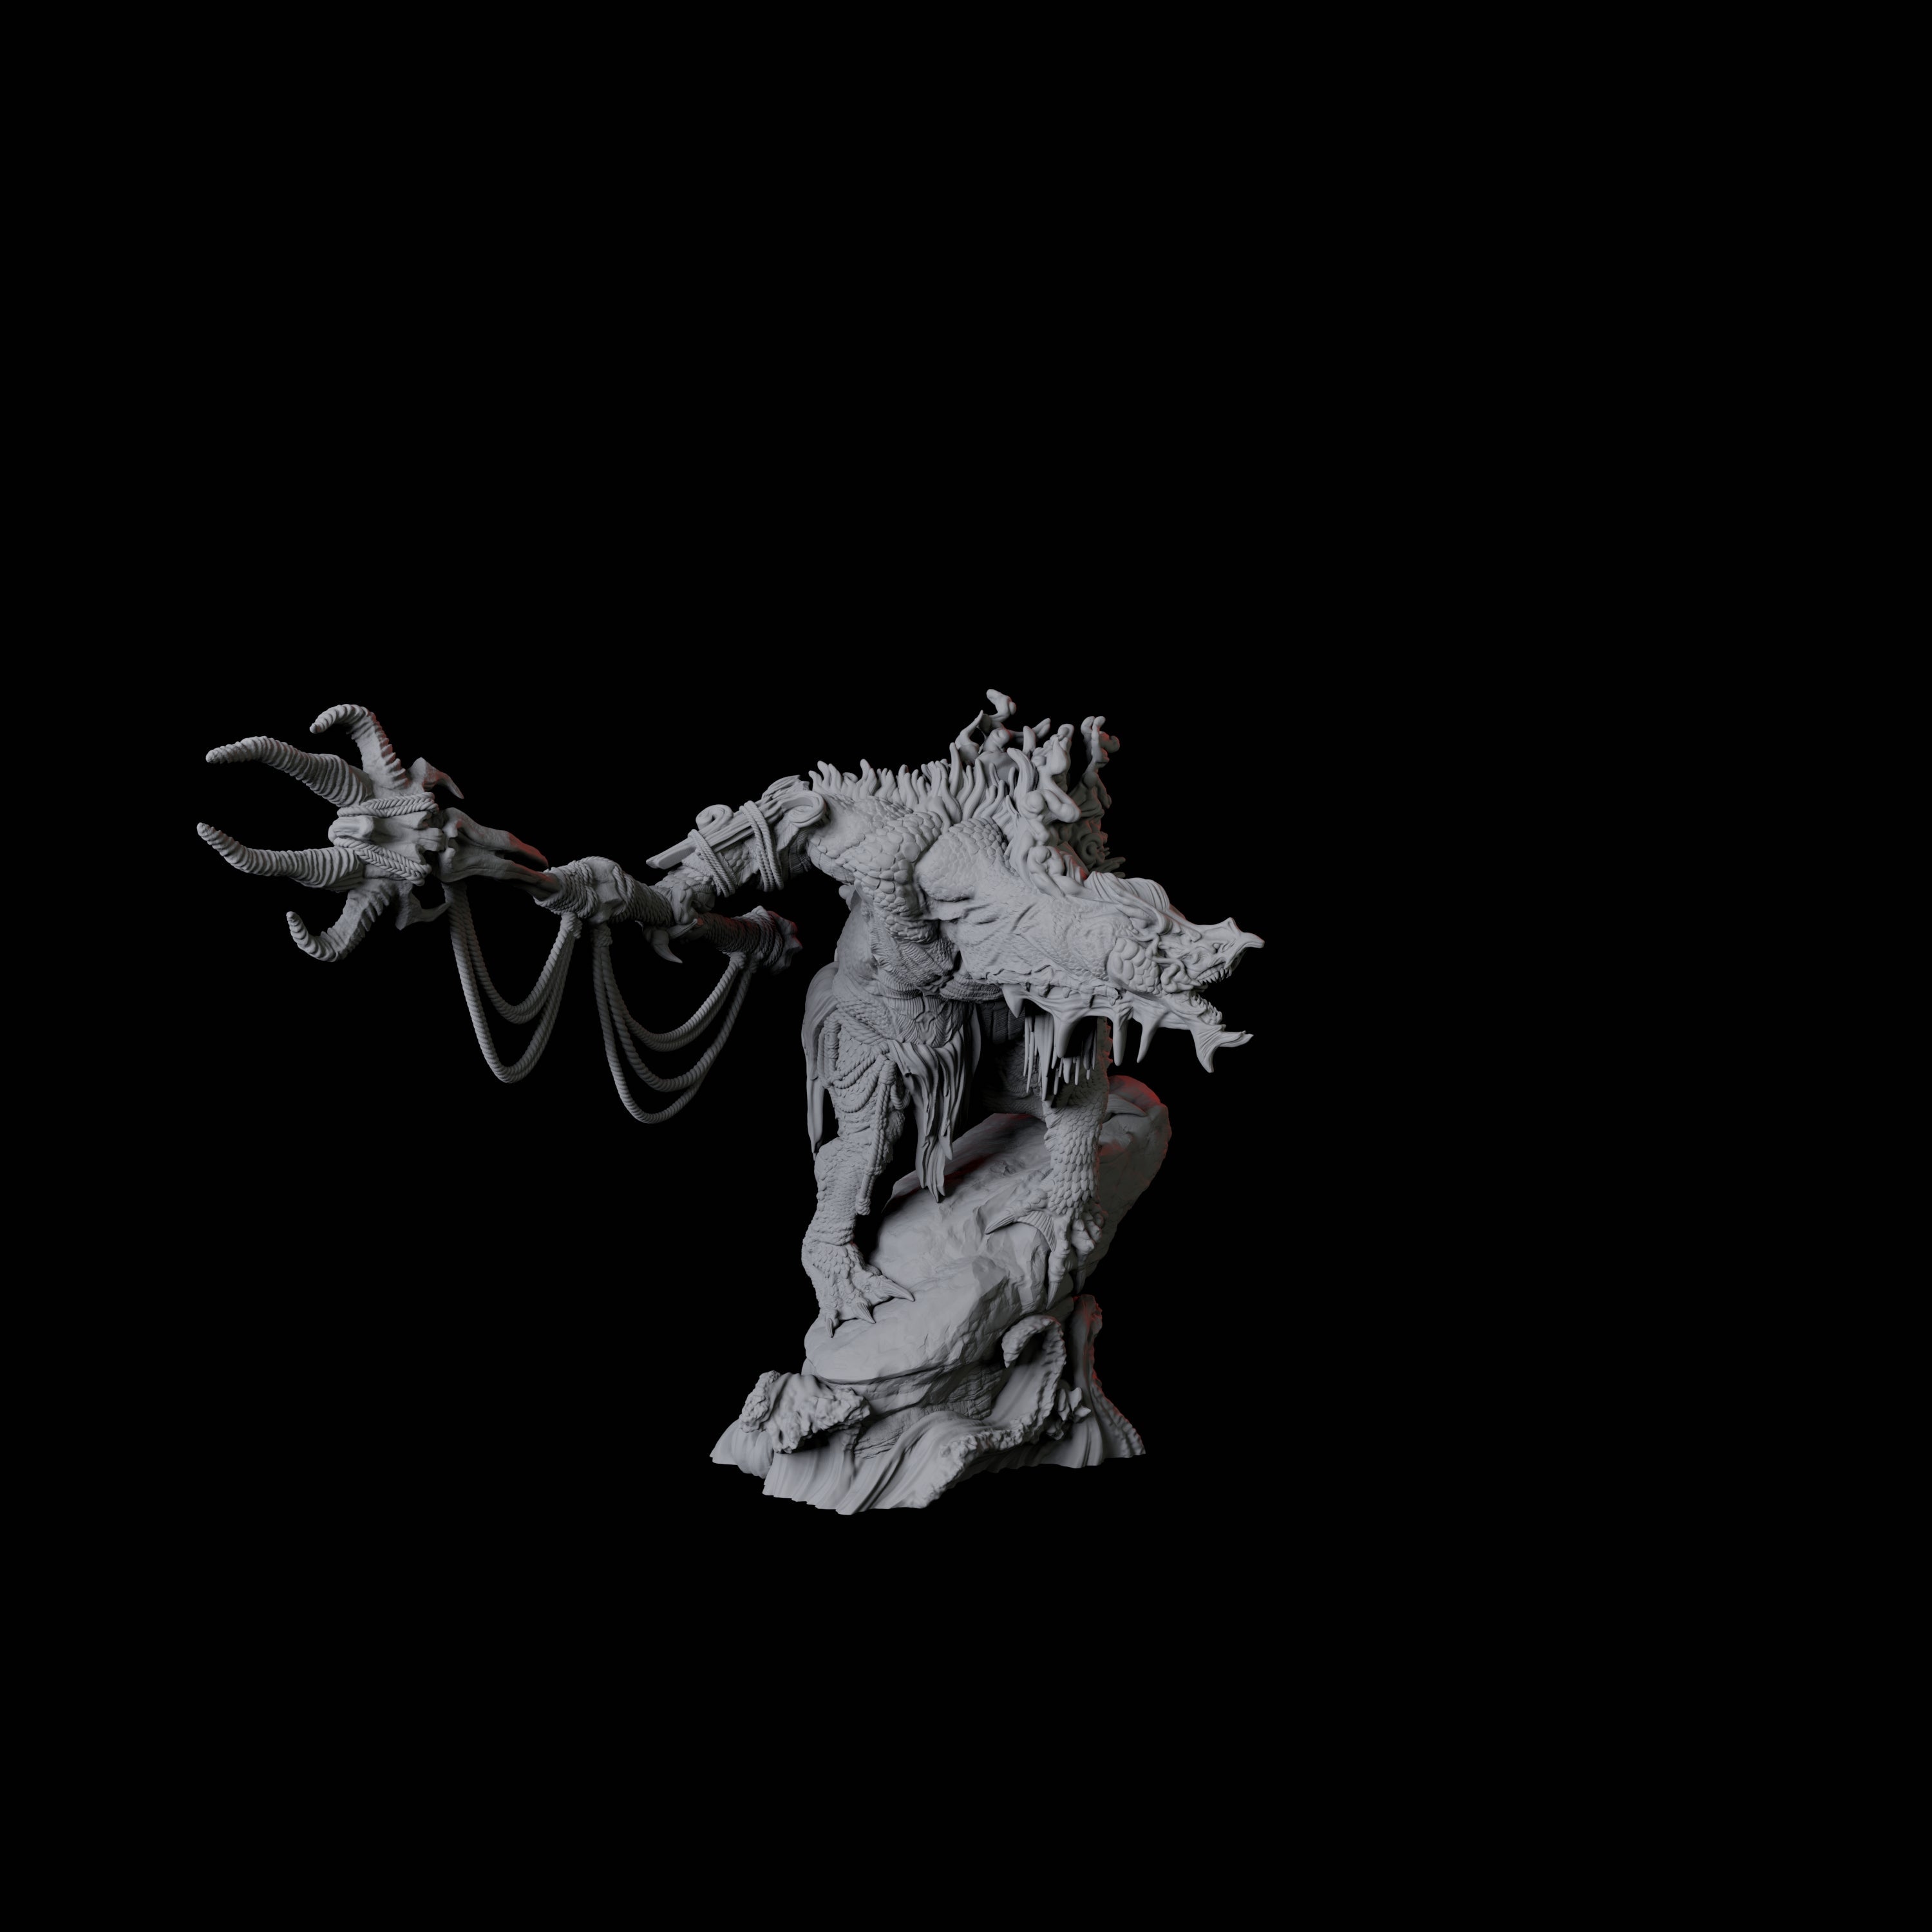 Storm Troll A Miniature for Dungeons and Dragons, Pathfinder or other TTRPGs